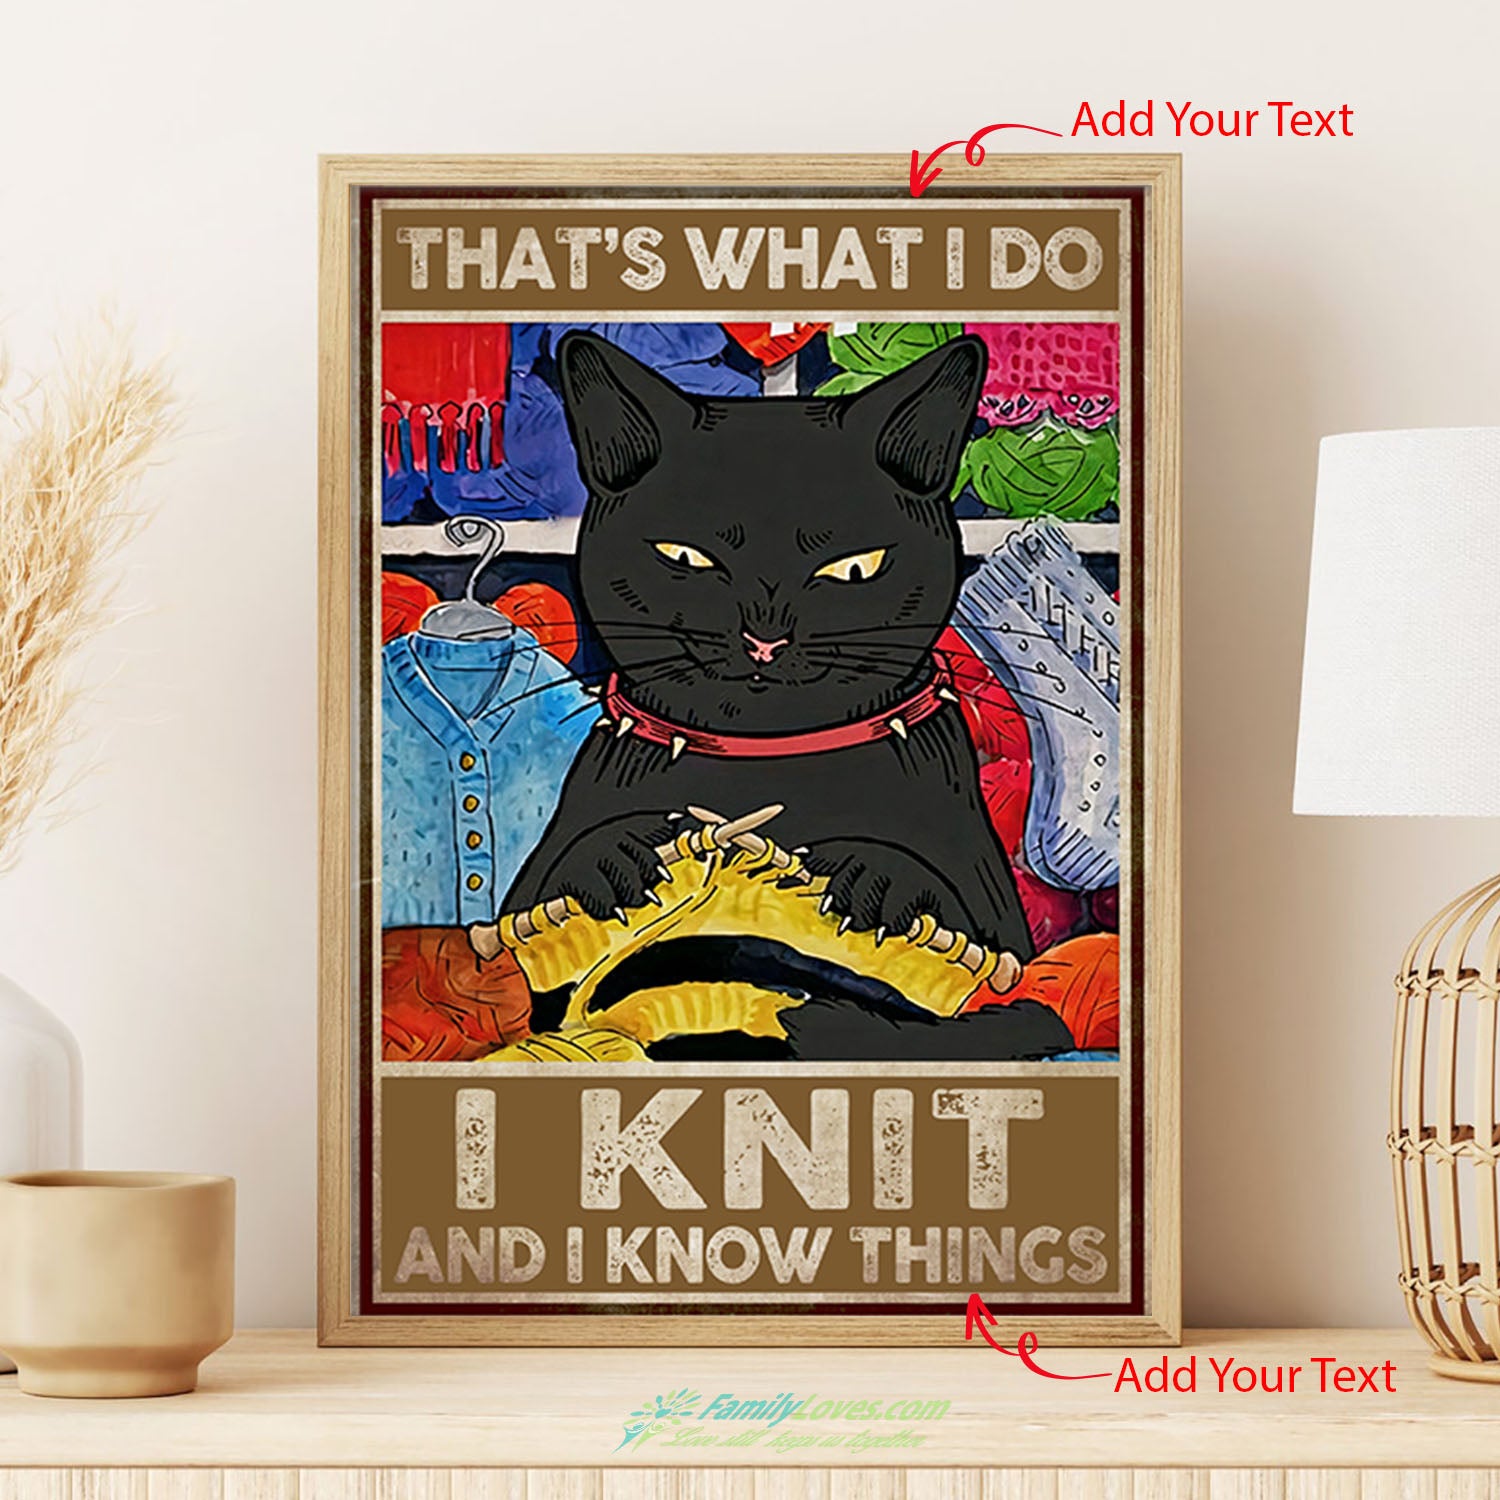 That What I Do I Knit And I Know Things Frame For Canvas 16X20 Poster Display All Size 1